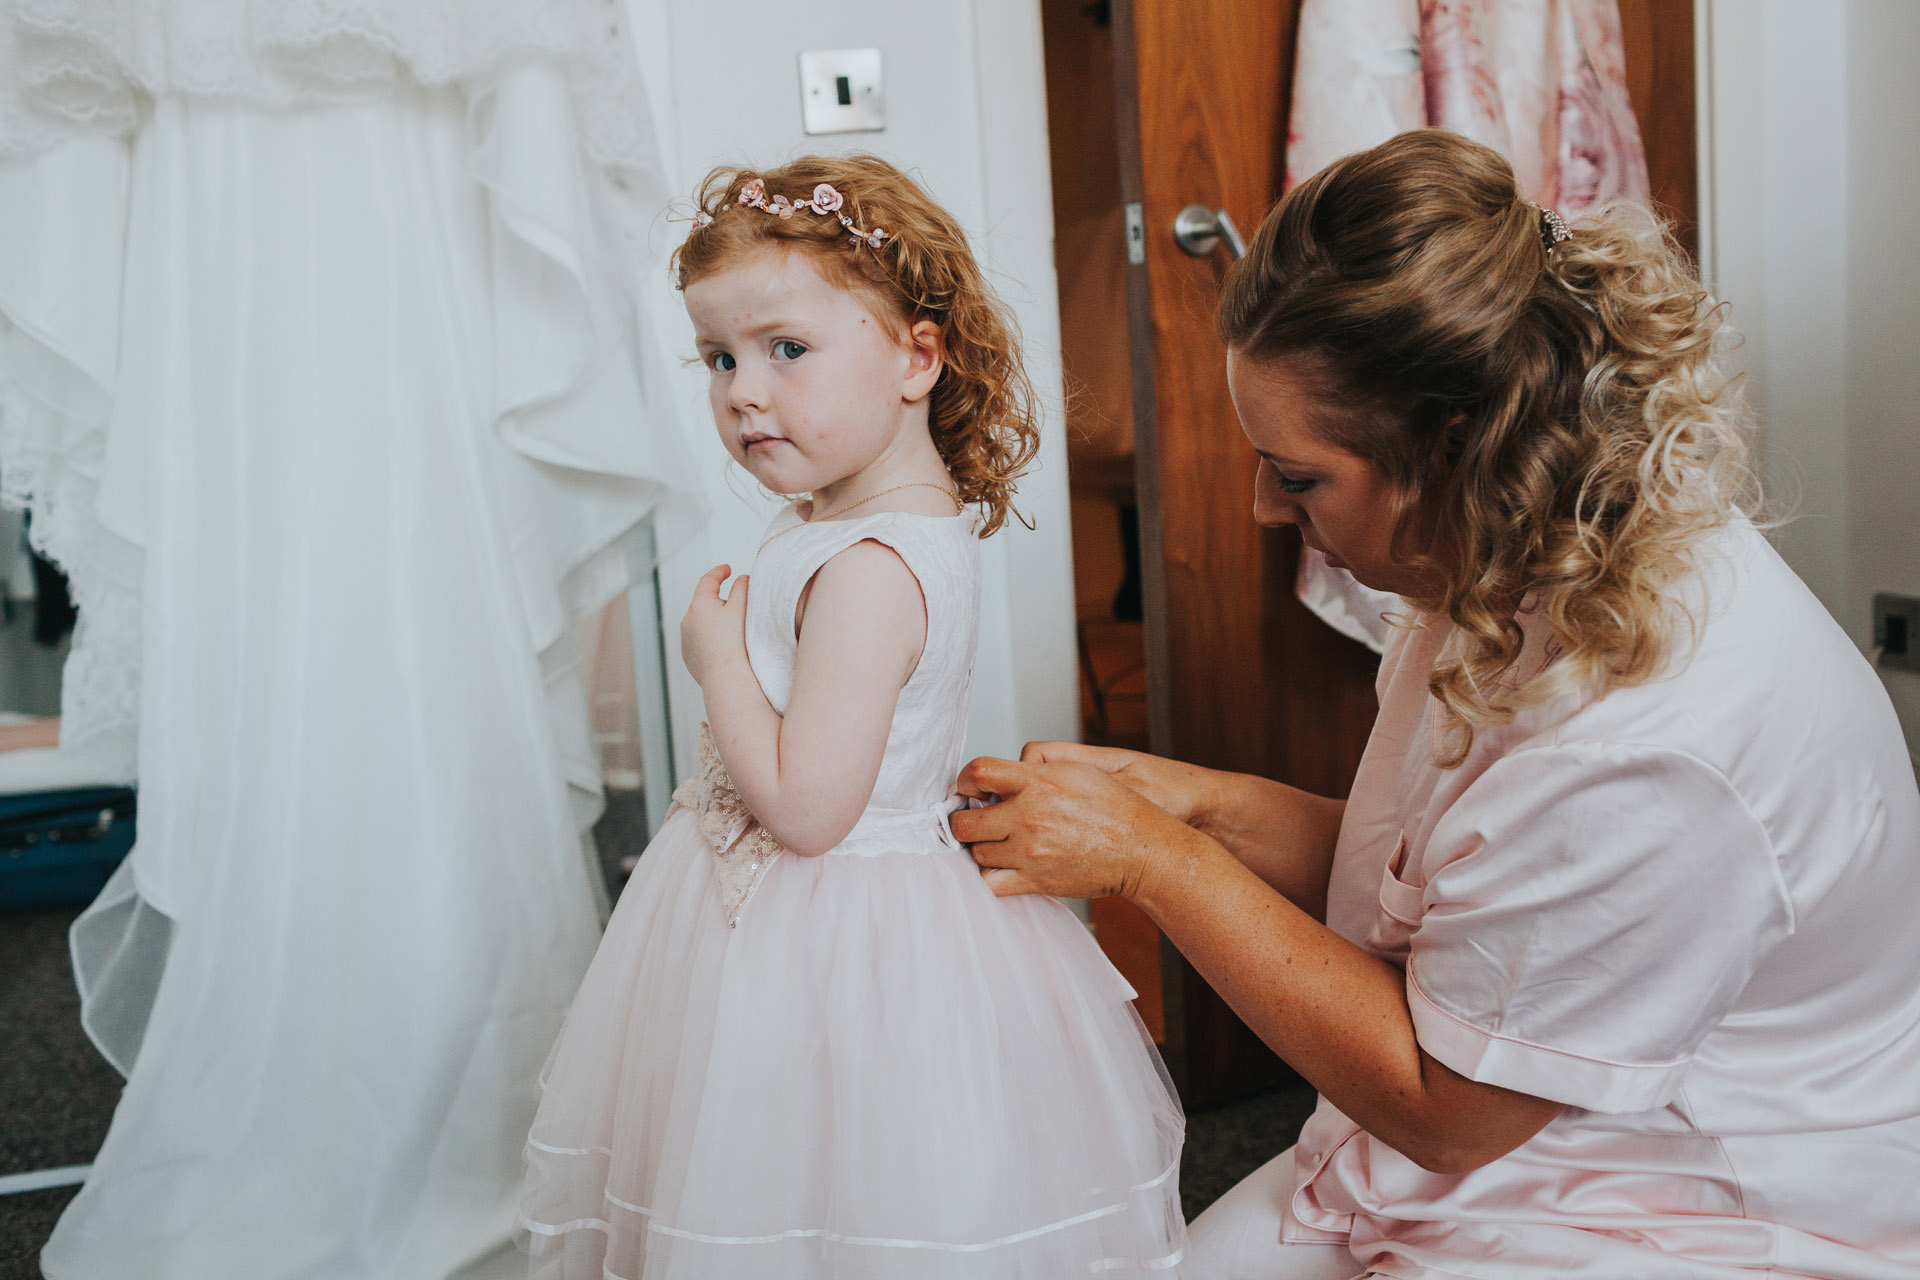 Flower girl had her buttons done up by bridesmaid, the brides wedding dress hangs in the background.